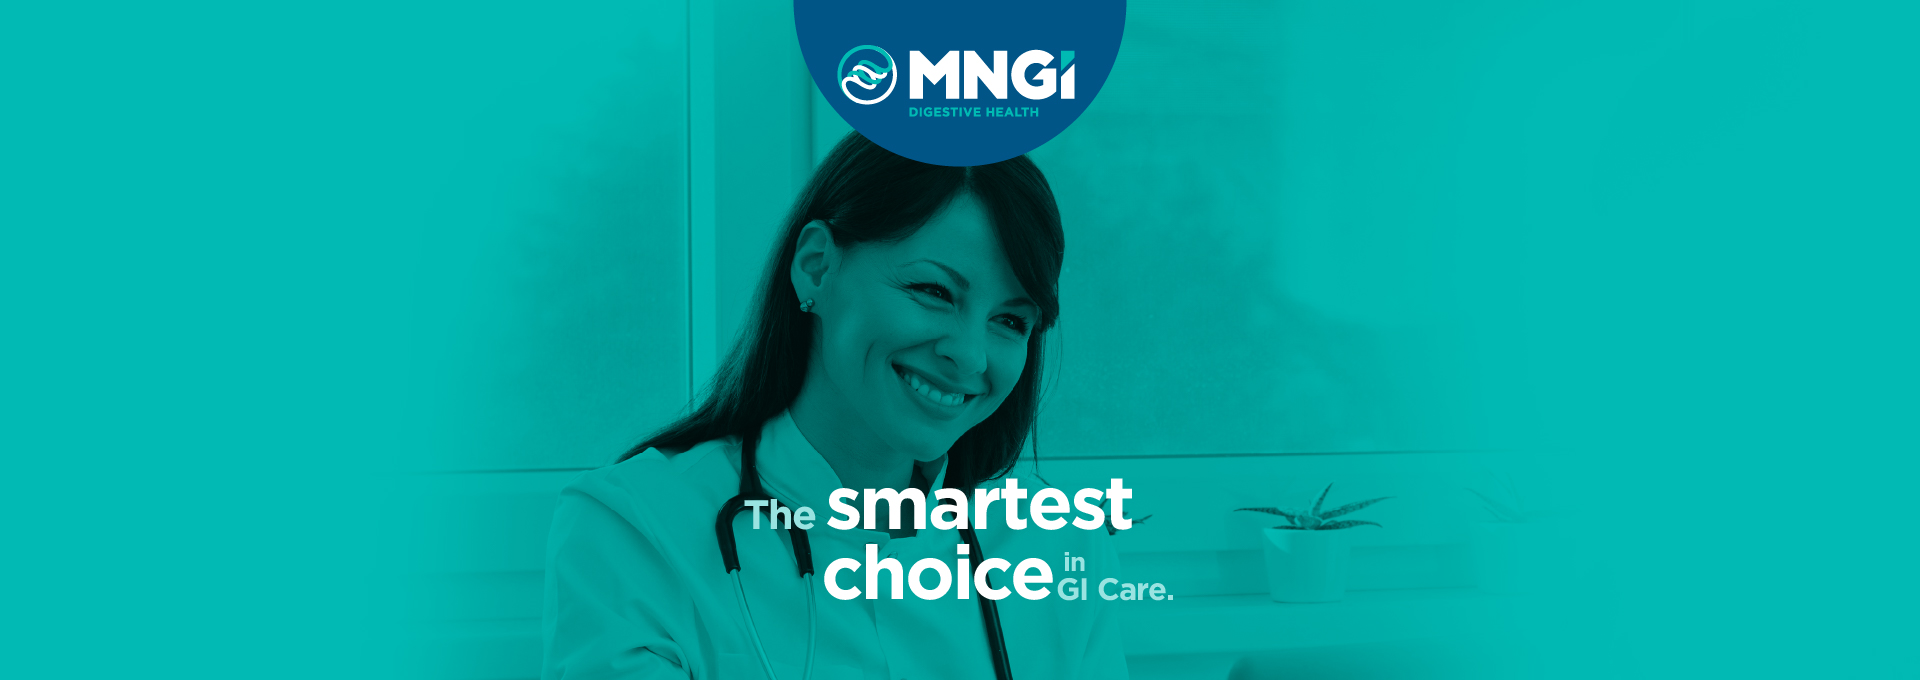 The Smartest Choice in GI Care